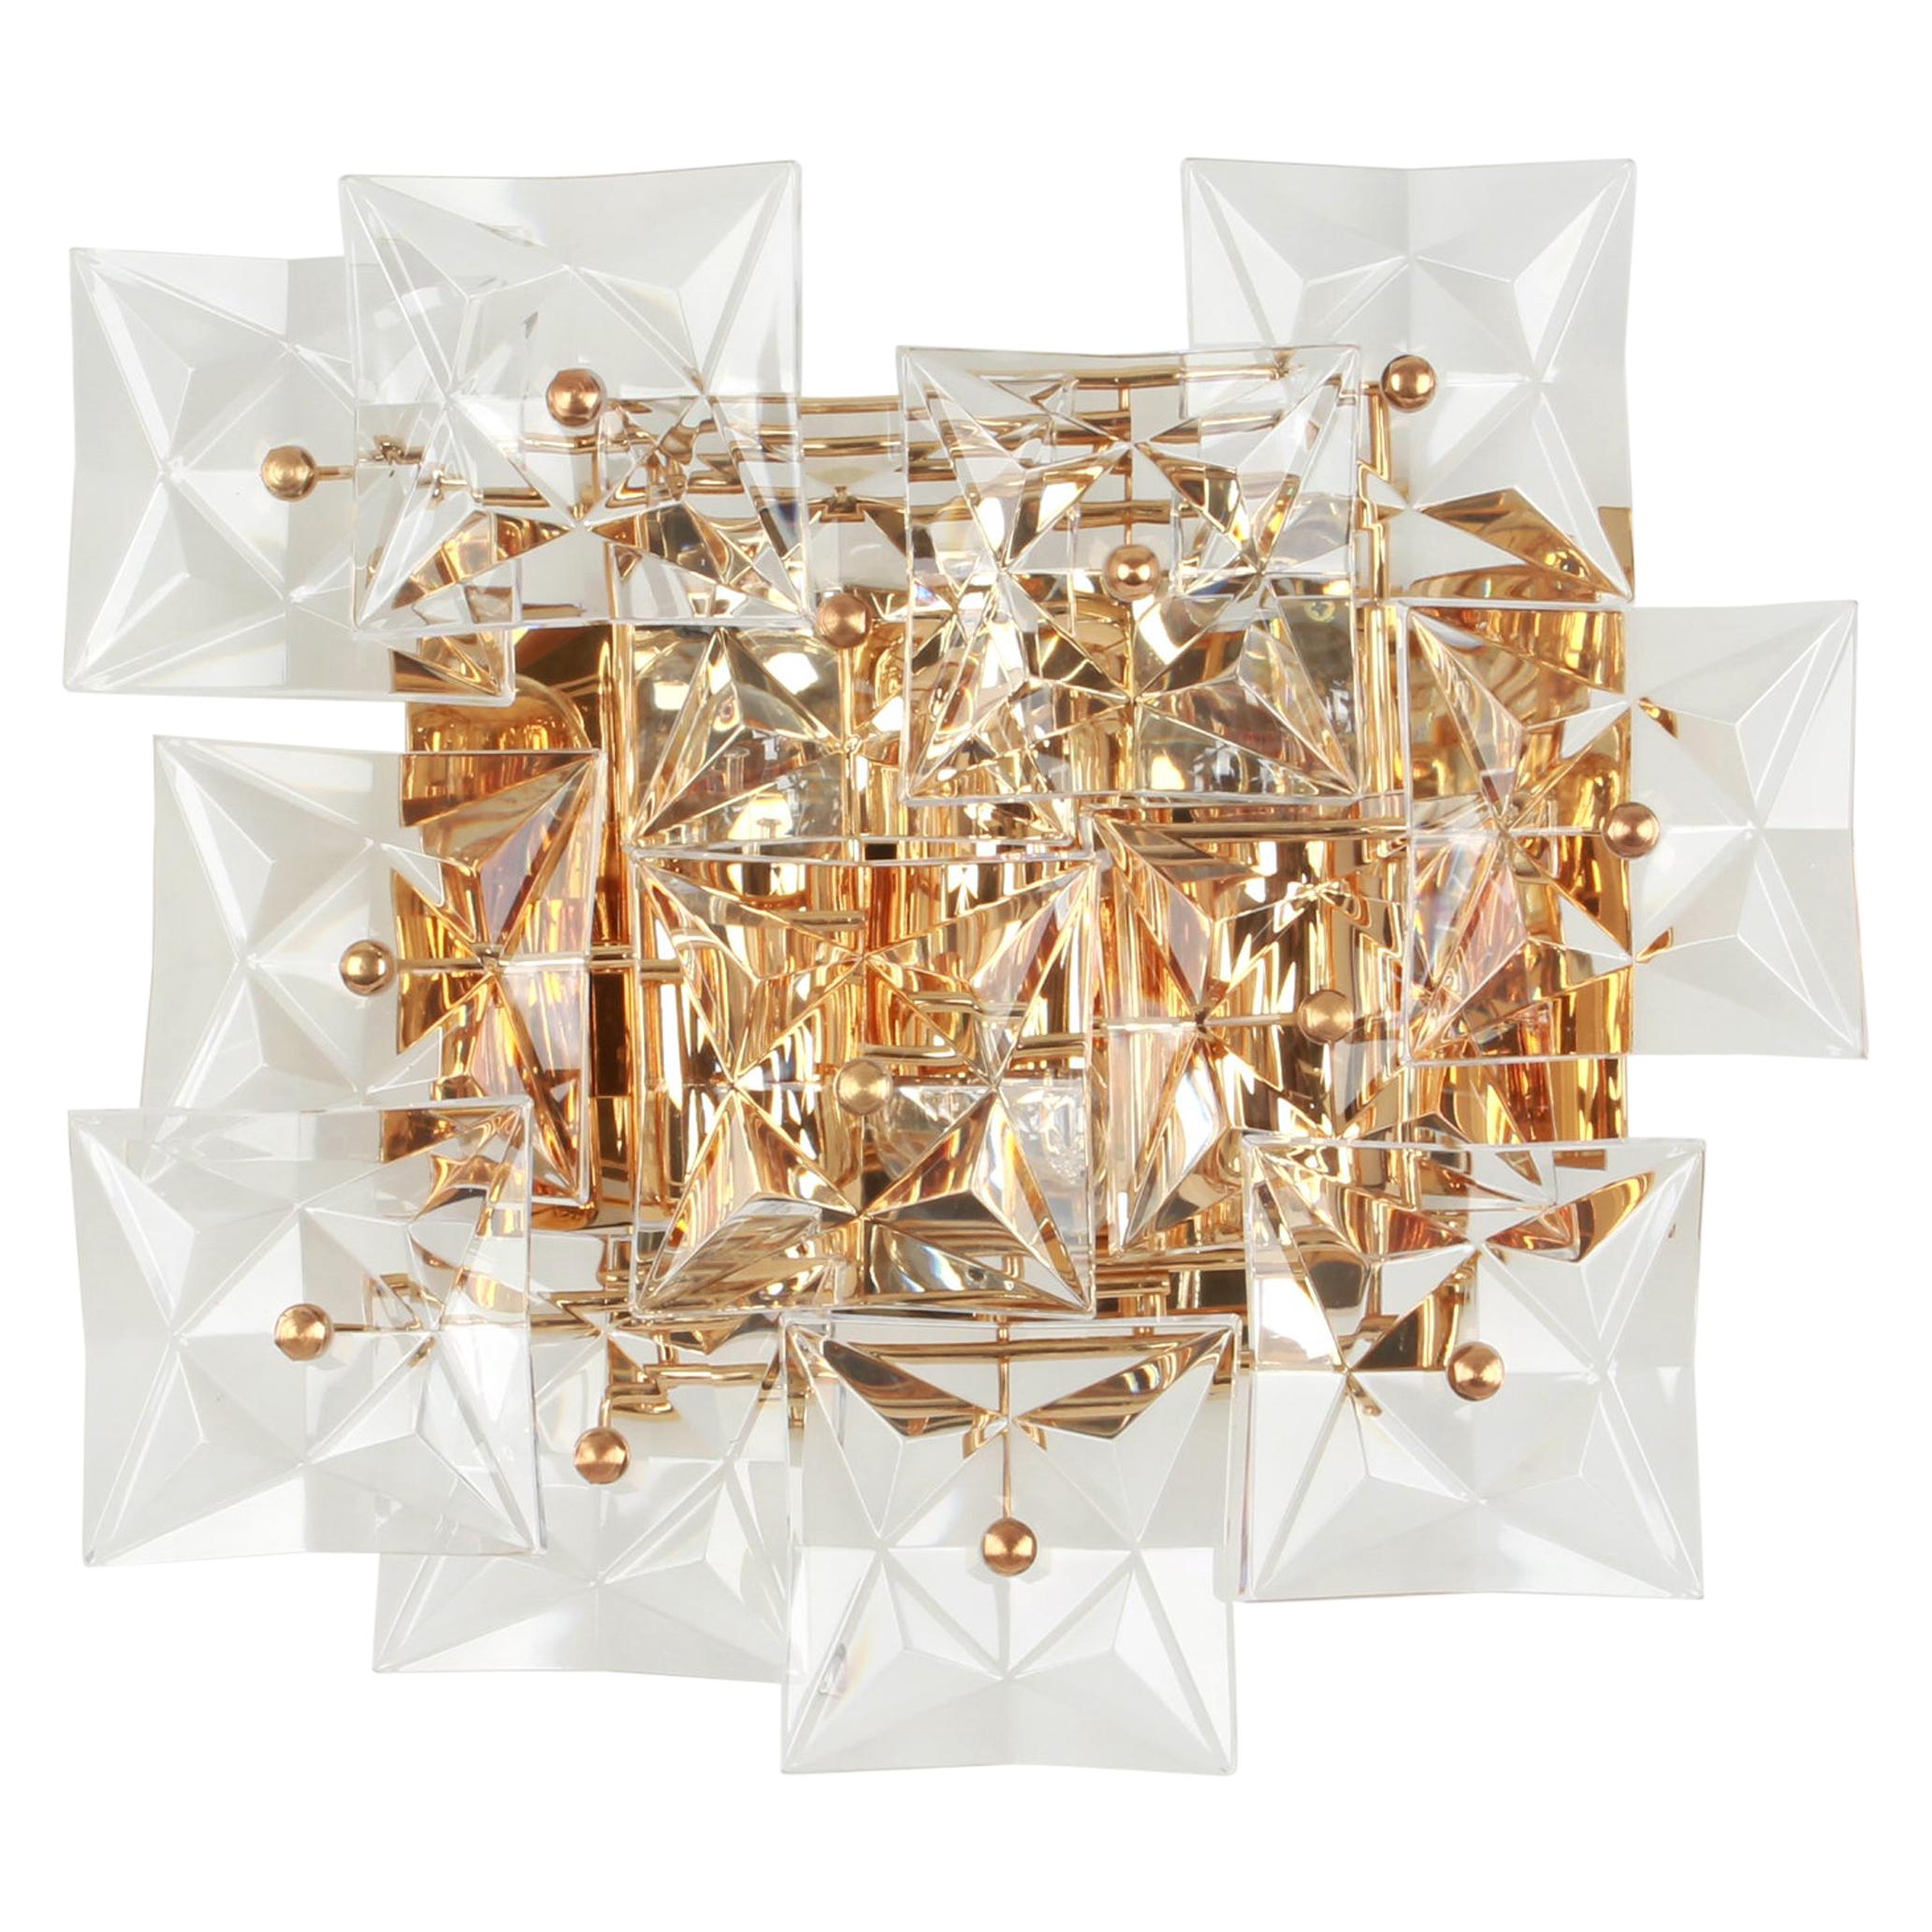 A stunning large golden sconce with crystal glasses, made by Kinkeldey, Germany, circa 1970-1979. It’s composed of crystal glass pieces on gilded brass frame.
From the Serie: Classic 

Best of the 1970s from Germany.

Dimensions
H 13.7 in. x W 15.7